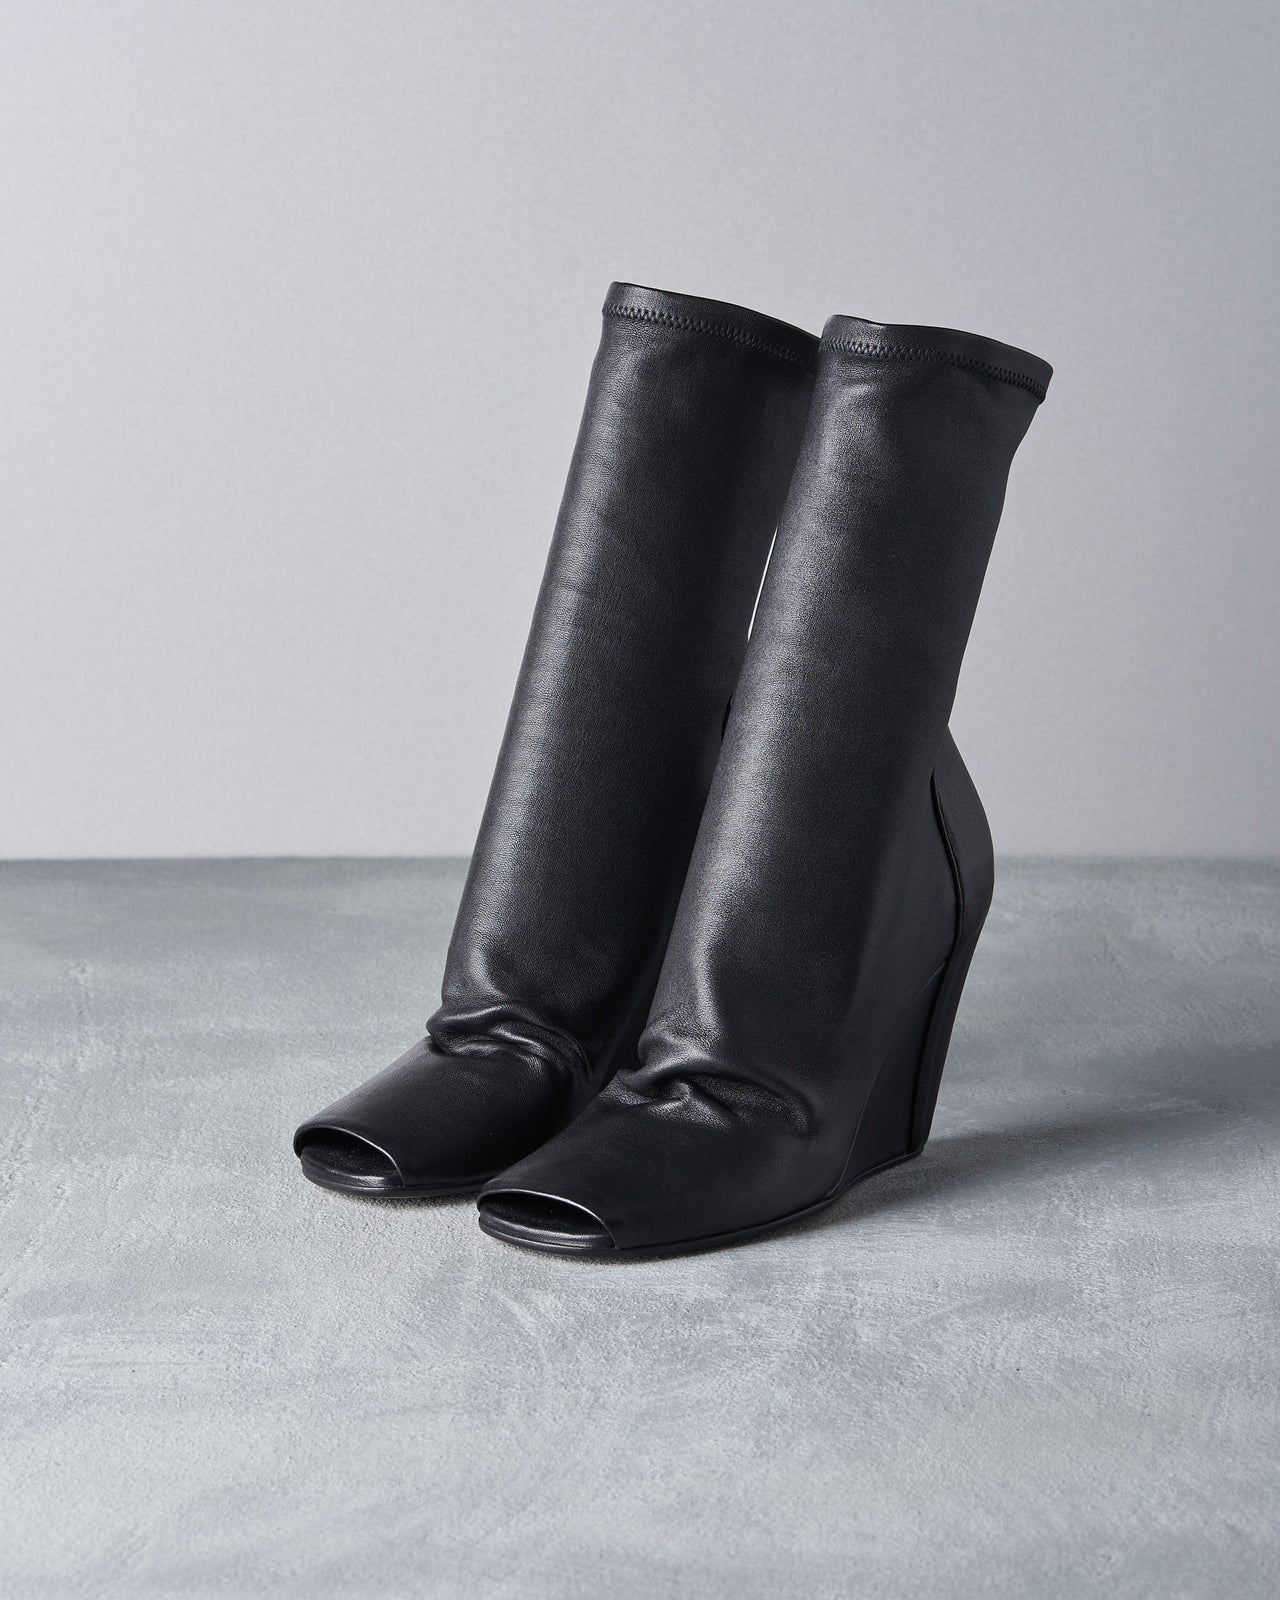 Rick Owens SS 2018 Leather sock wedge